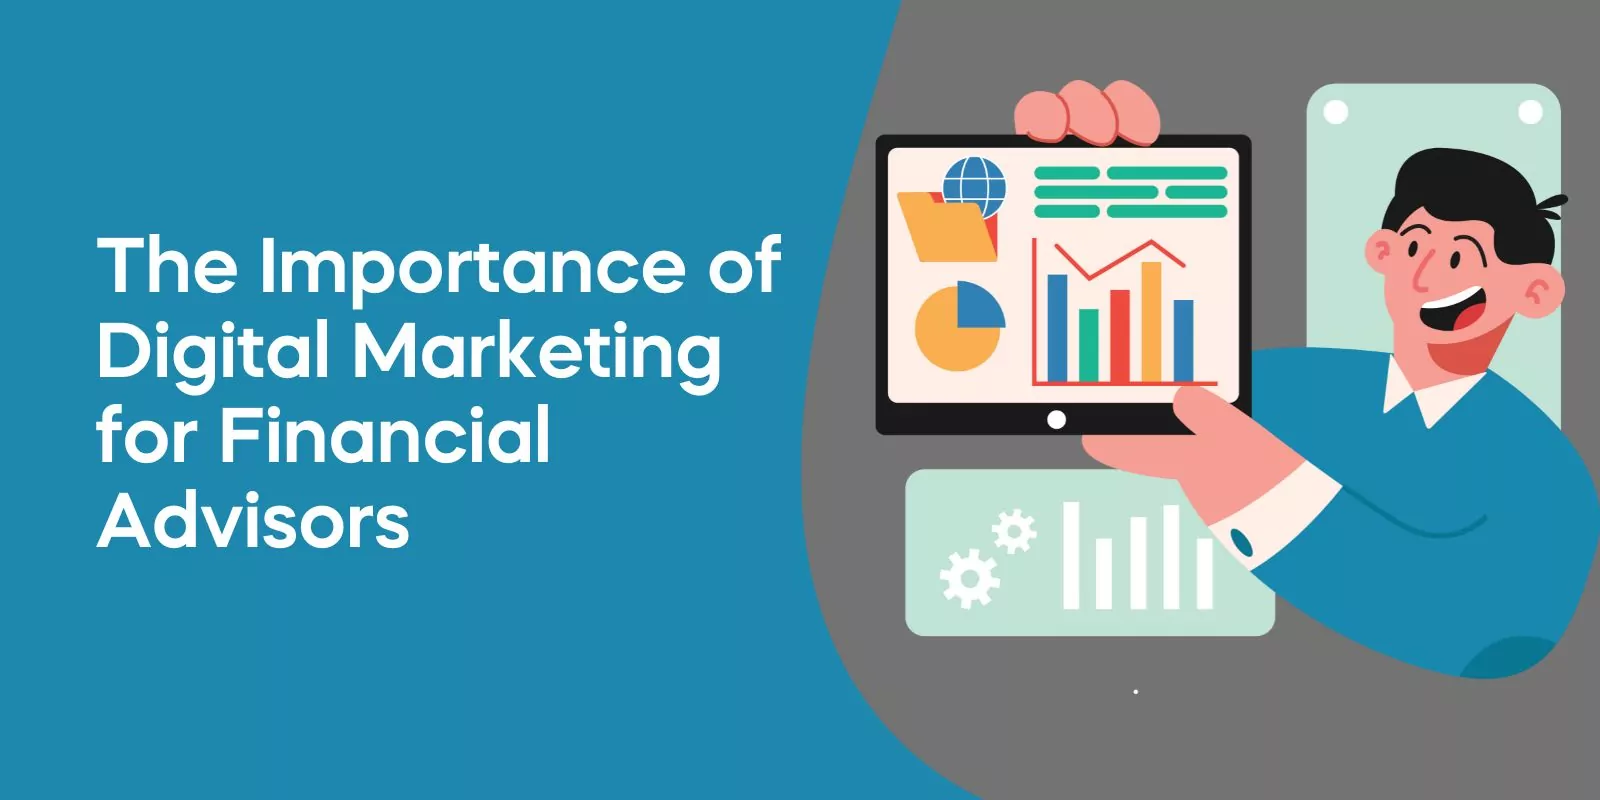 The Importance of Digital Marketing for Financial Advisors